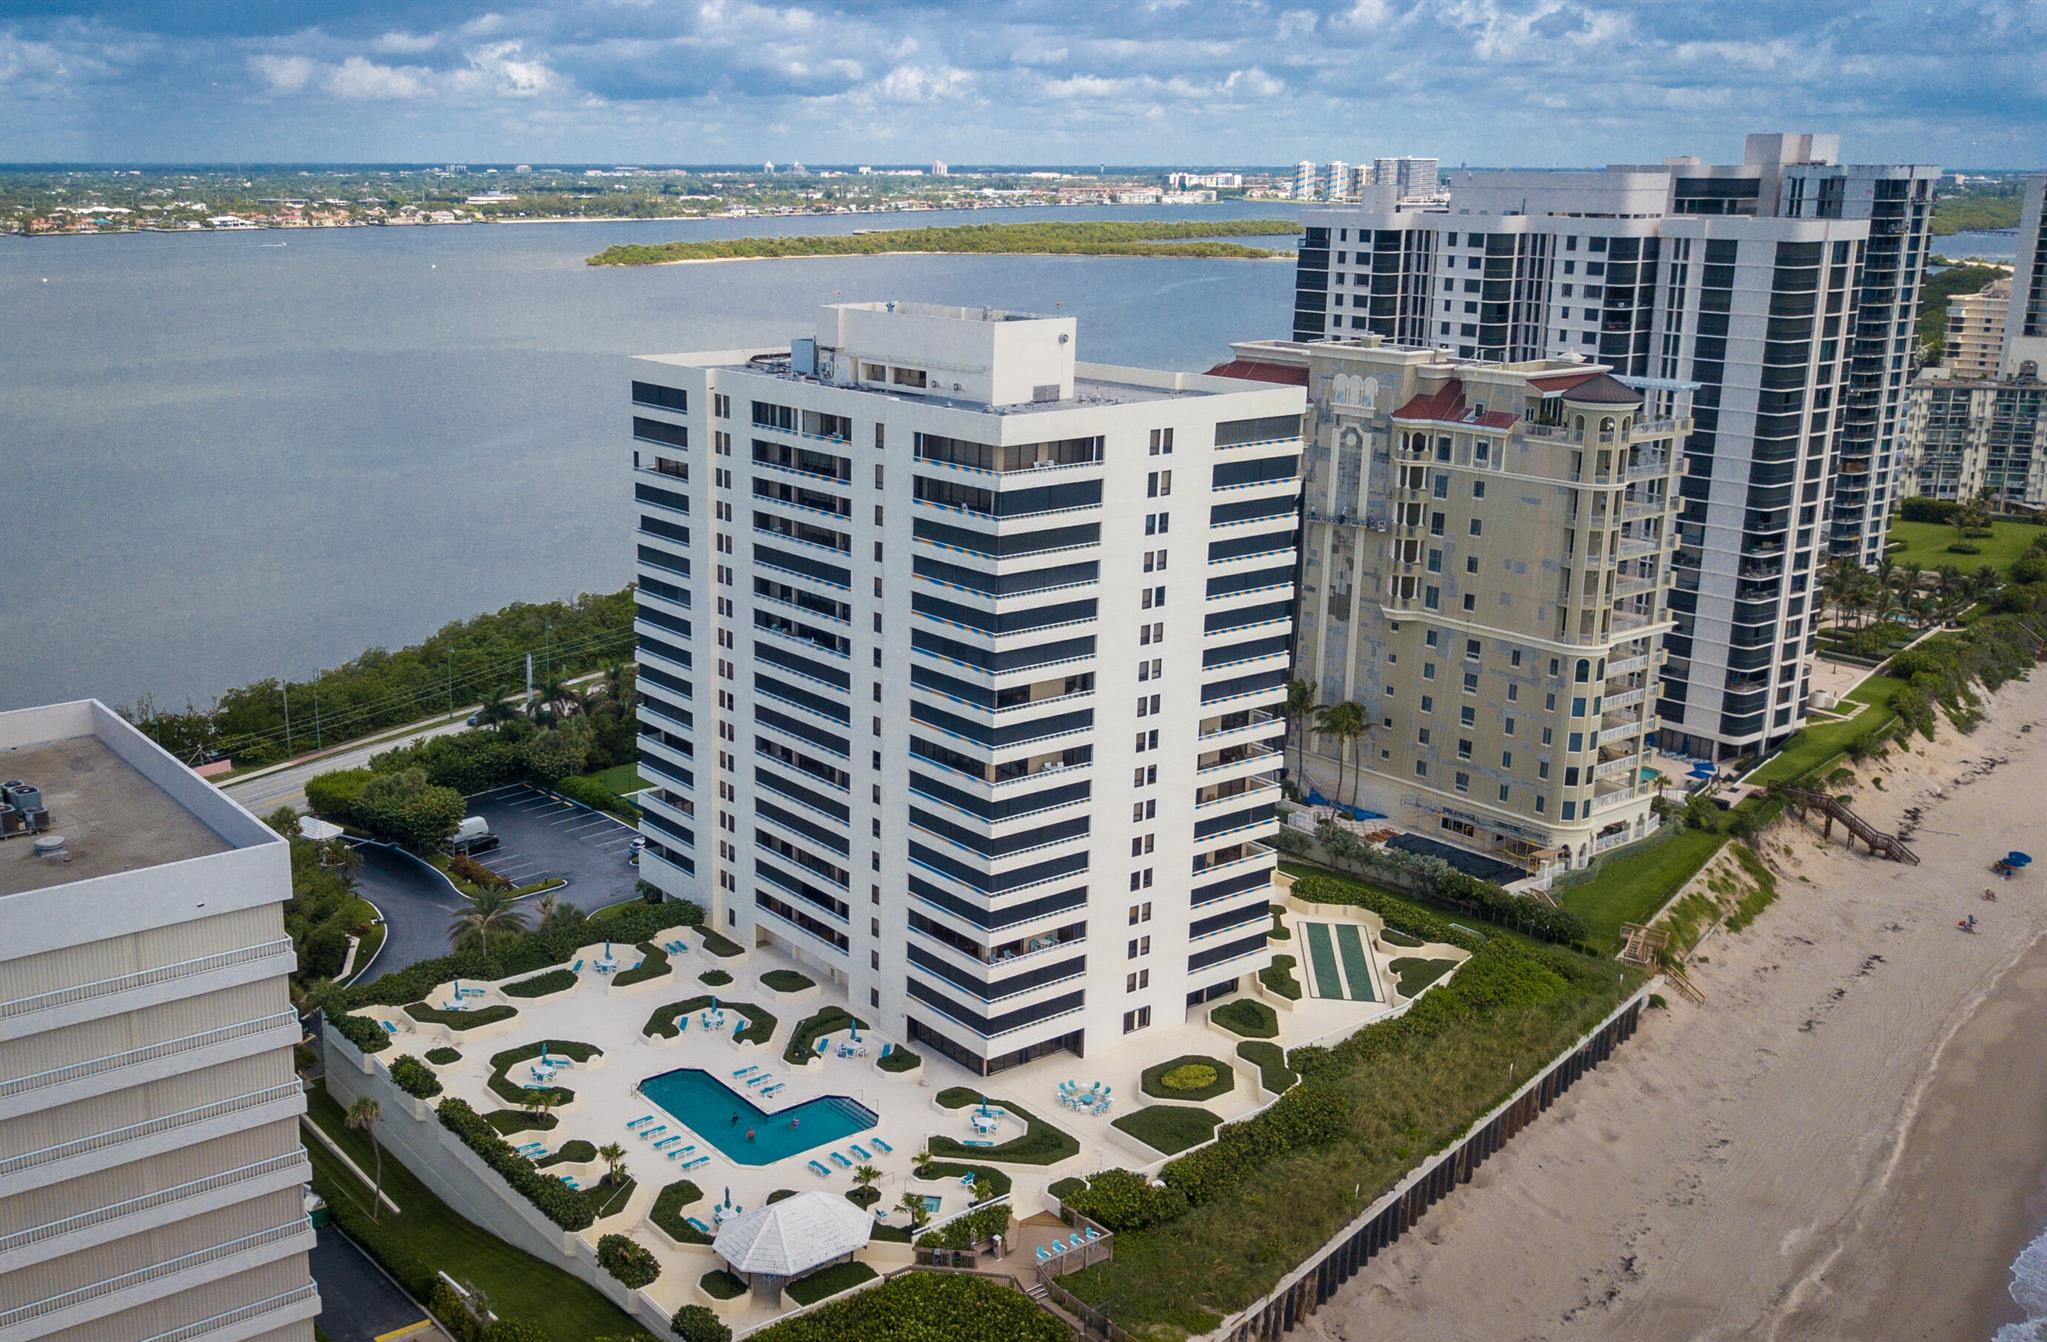 Unobstructed views - SOUTHWEST FACING CORNER unit w/over 1600 lvg sq ft, panoramic views of the ocean & Intracoastal Waterway/ Lagoon w/full wrap around balconies, all spacious main rooms access & have a water view.  Interior large laundry with pantry and additional storage,  ample additional multiple storage areas, one garage parking space plus additional garage parking space access as well as exterior.  All Reaches common areas have been superbly renovated both inside and out.  Ample gathering space large social room w/ocean view complete w/multiple tv's, billiards, pizza oven & more. Gym, mens and ladies locker rooms with sauna.   Tennis, pickleball, one of  the largest pool deck areas on the island,  wraps around the building with pool, spa, shuffle board & more.  More photos coming